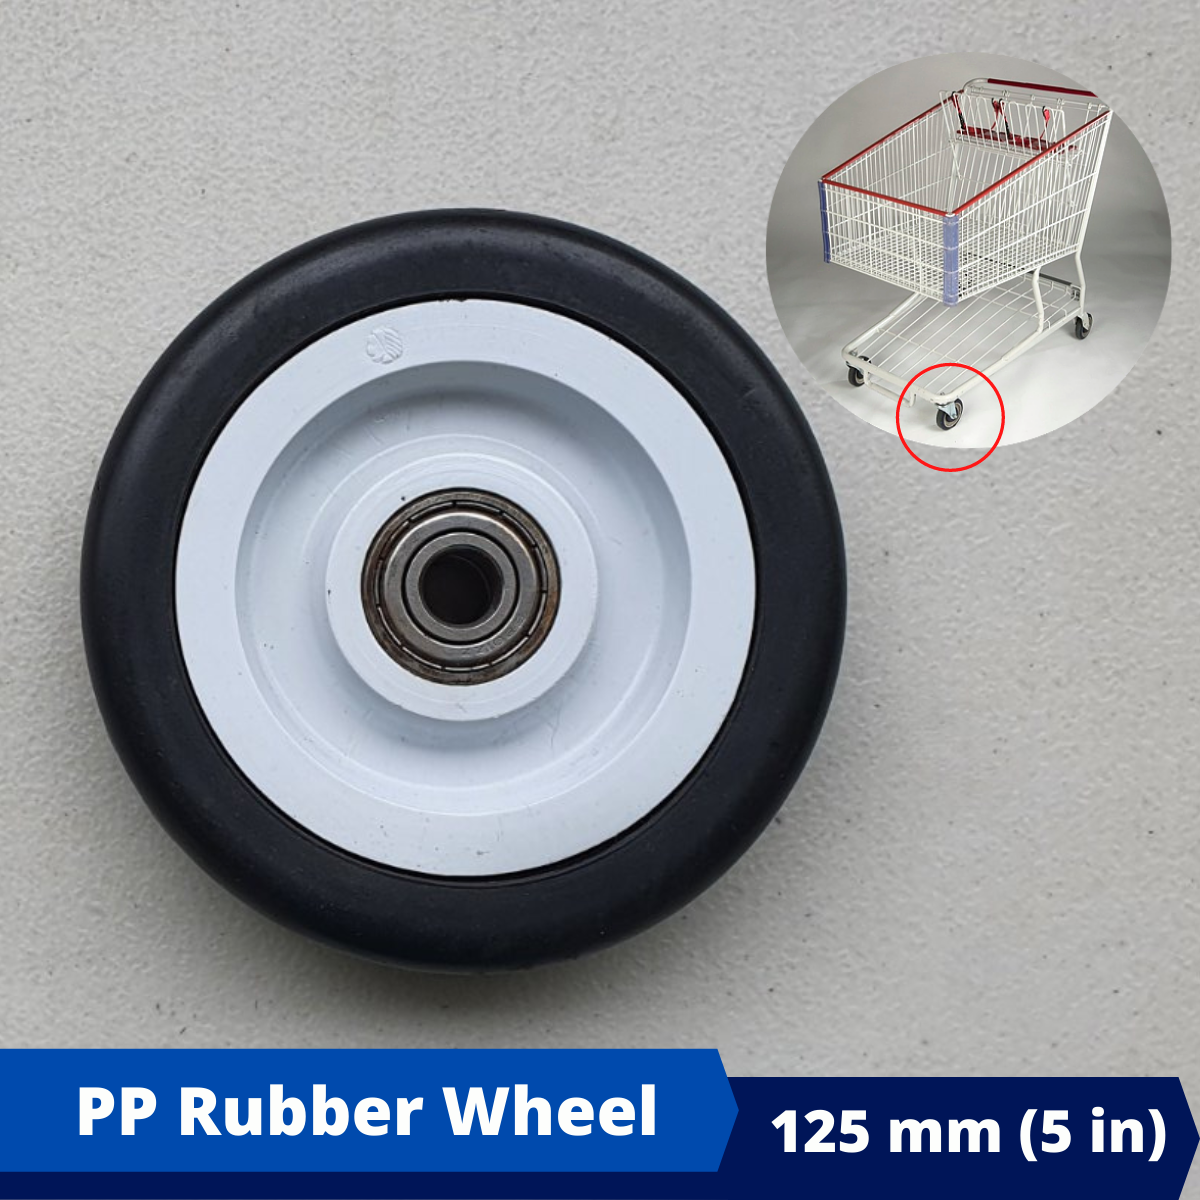 Description Easy to understand throw BLACK HORSE Heavy Duty Push Cart Rubber Wheel 125 mm ( 5 inches) 1 PC |  Industrial | Medical | Equipment | Hand Truck | Dollies | Grocery Push Cart  | Lazada PH